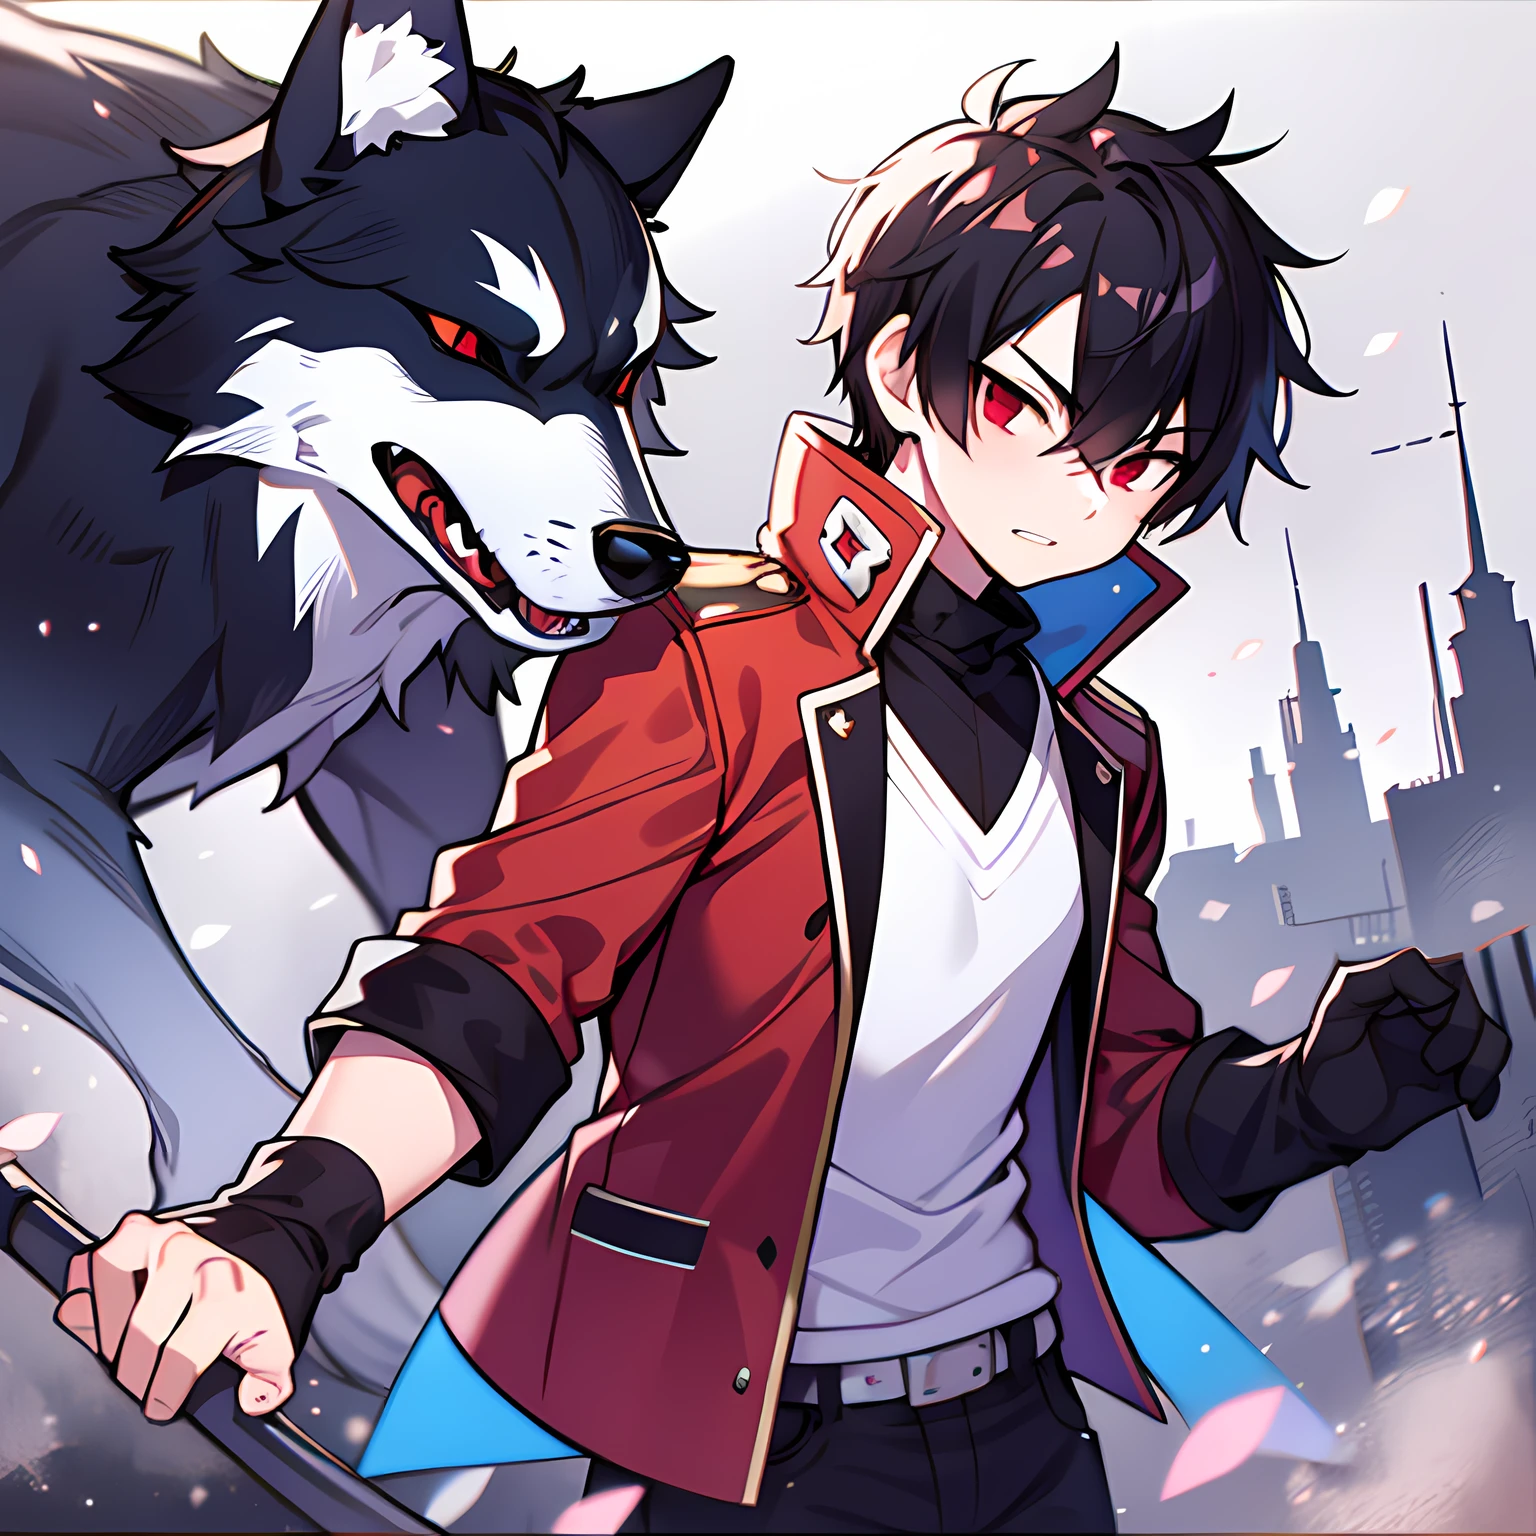 A boy with short fluffy hair and red eyes, with a wolf-like characteristics,